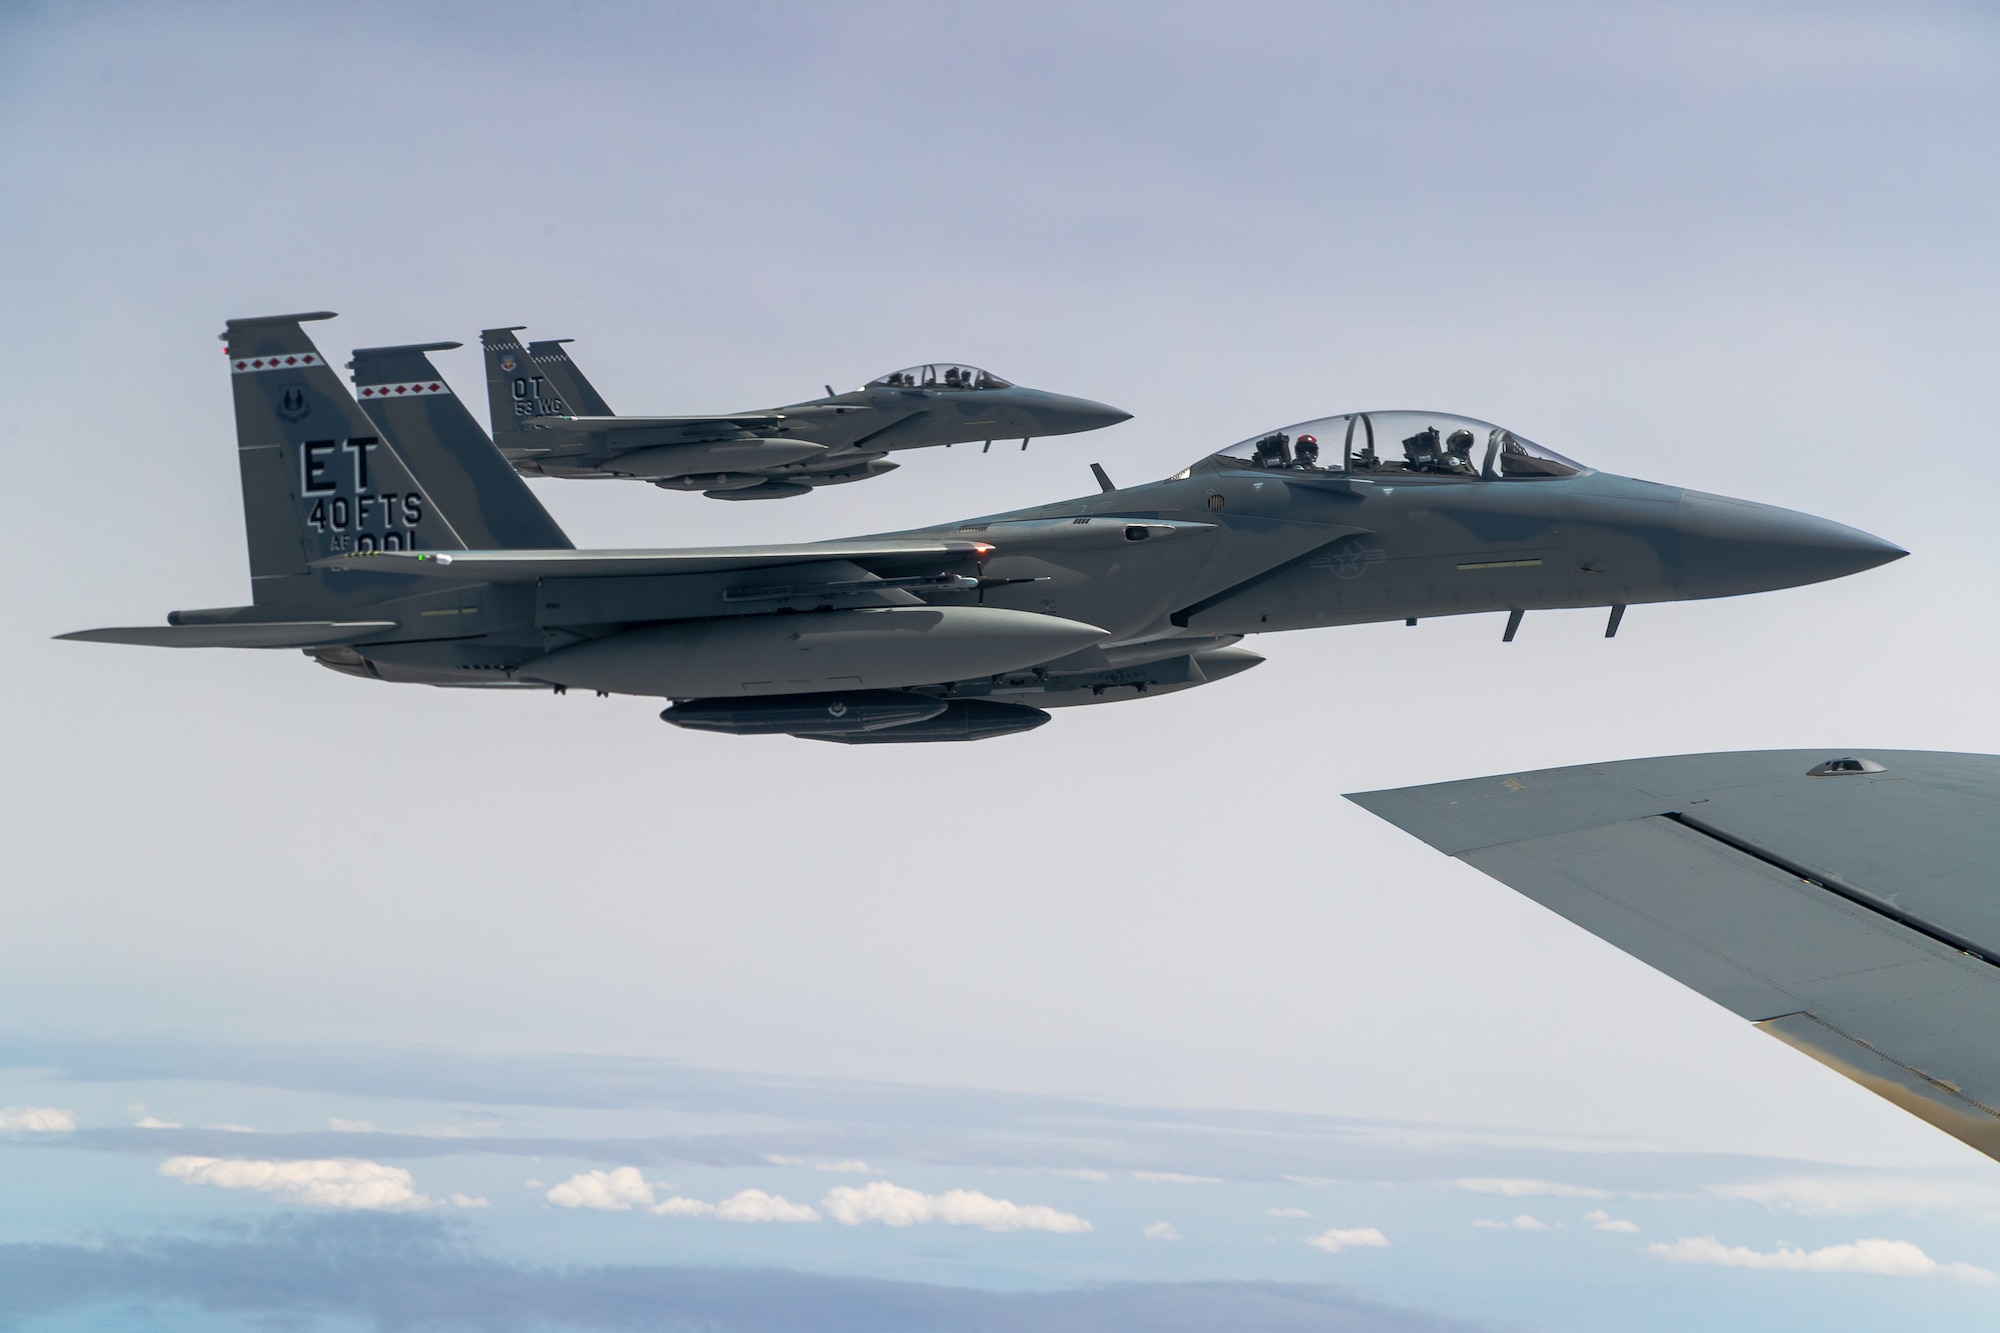 F-15EX Eagle II’s from the 40th Flight Test Squadron, 96th Test Wing, and the 85th Test and Evaluation Squadron, 53rd Wing, both out of Eglin Air Force Base, Florida, fly in formation during aerial refueling operations with a KC-135 Stratotanker from the 370th Flight Test Squadron out of Edwards Air Force Base, California, May 14. The Eagle II participated in the Northern Edge 21 exercise in Alaska earlier in May. (Air Force photo by Ethan Wagner)